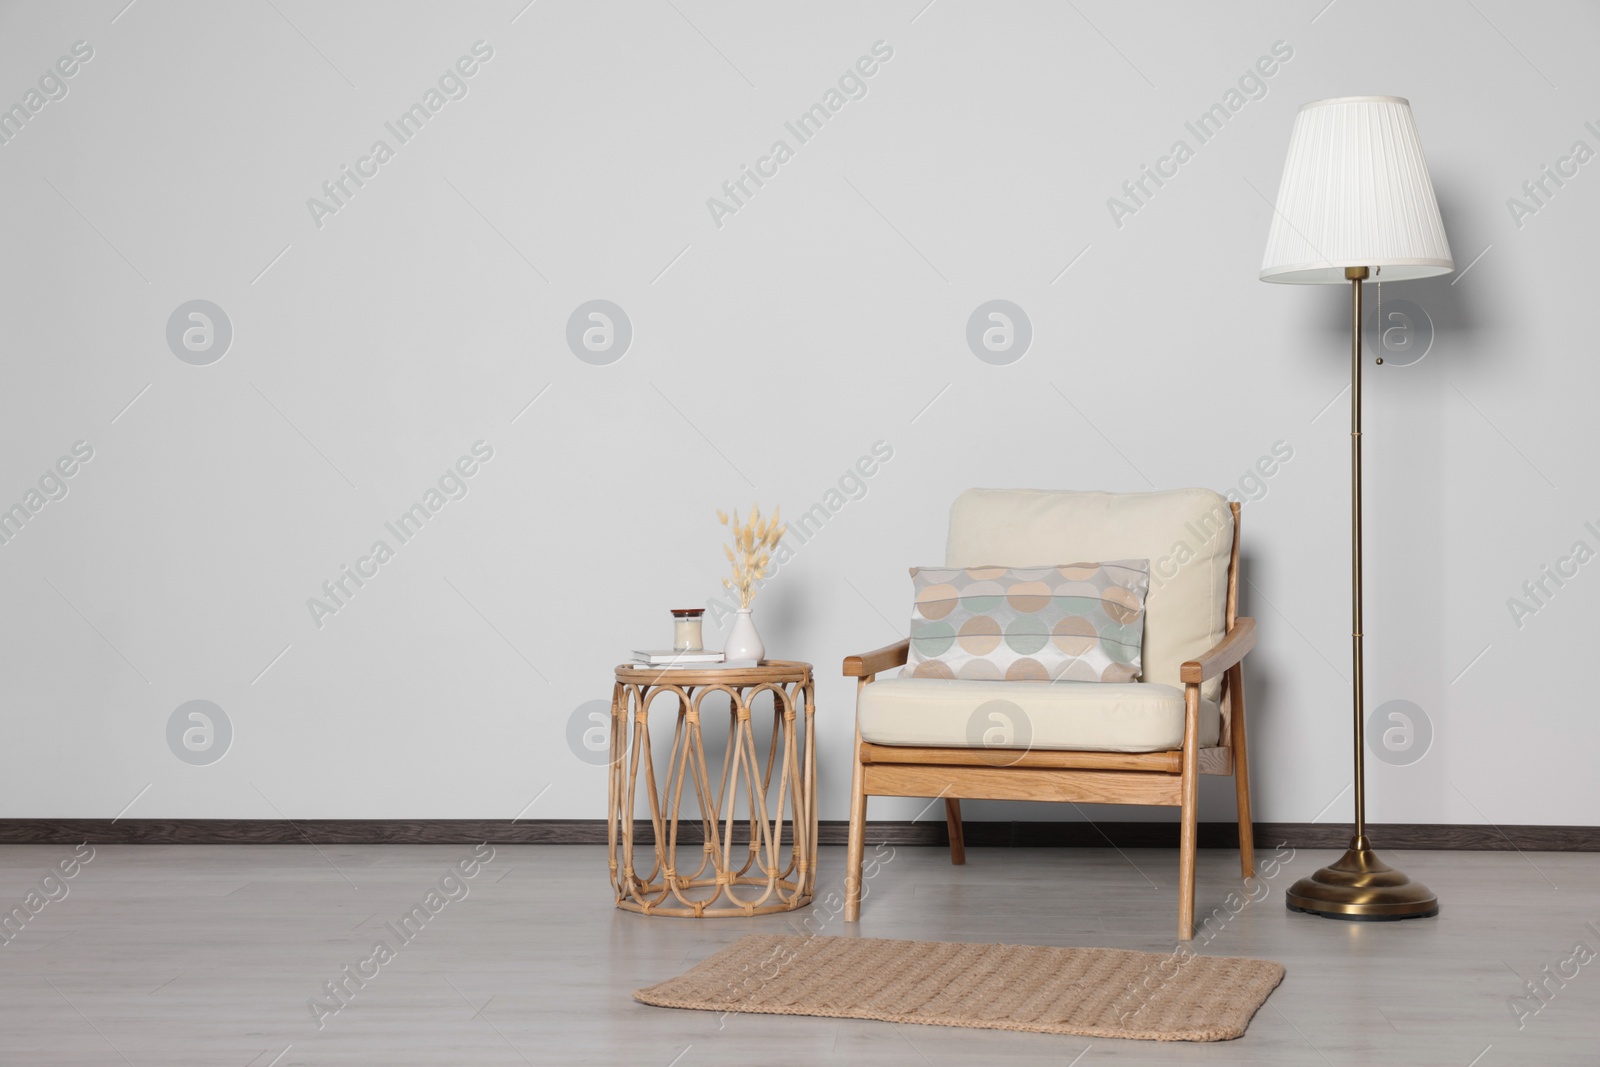 Photo of Stylish armchair, floor lamp and table near white wall, space for text. Interior design